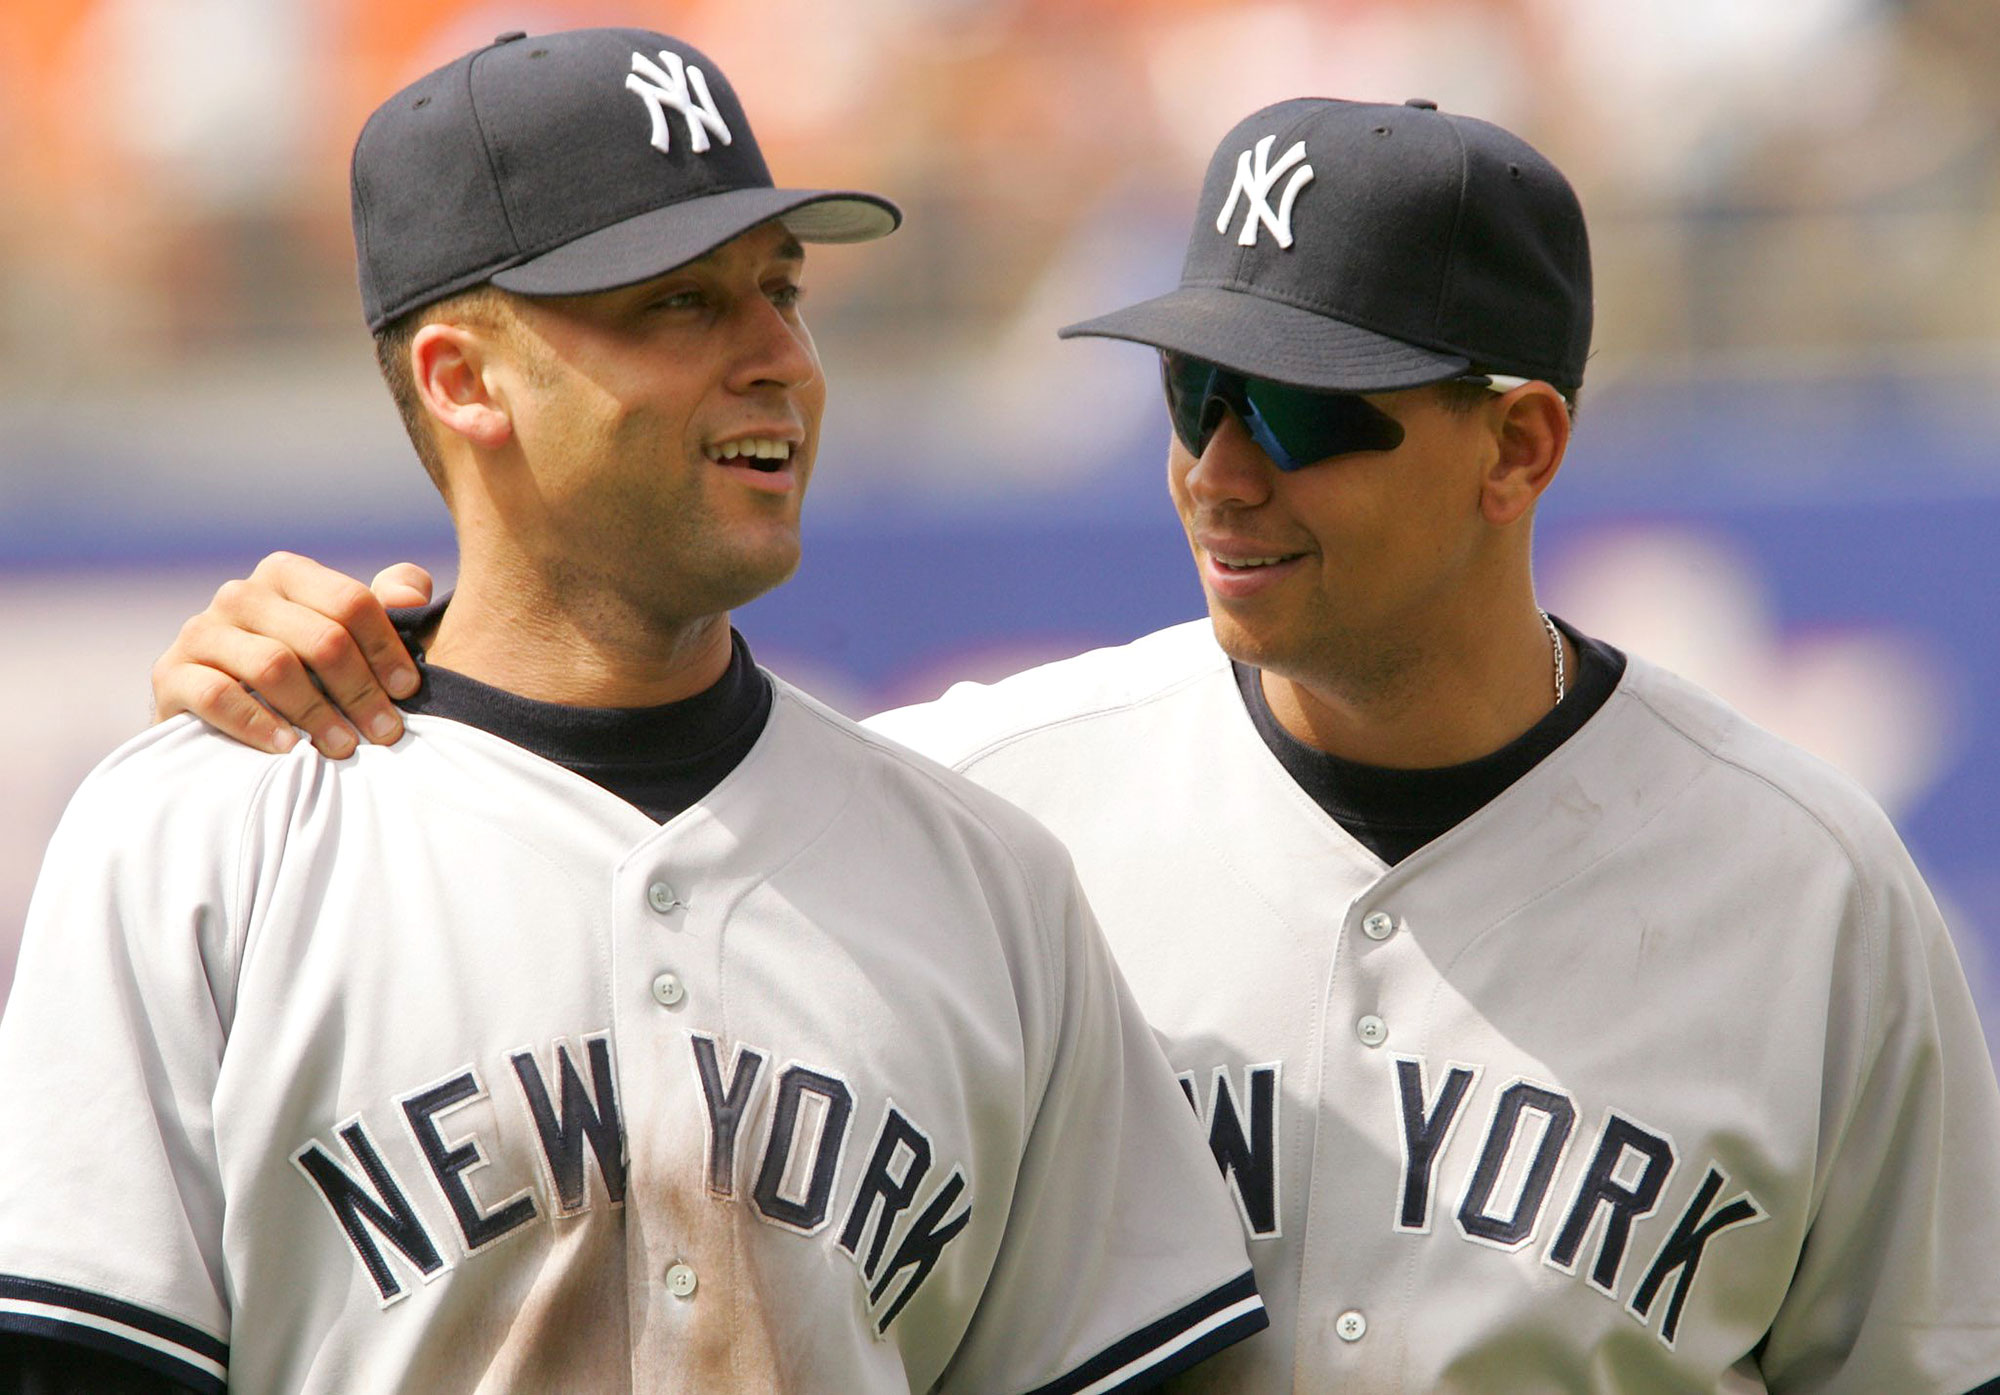 Yankees great Derek Jeter explains why he wanted his No. 2 retired